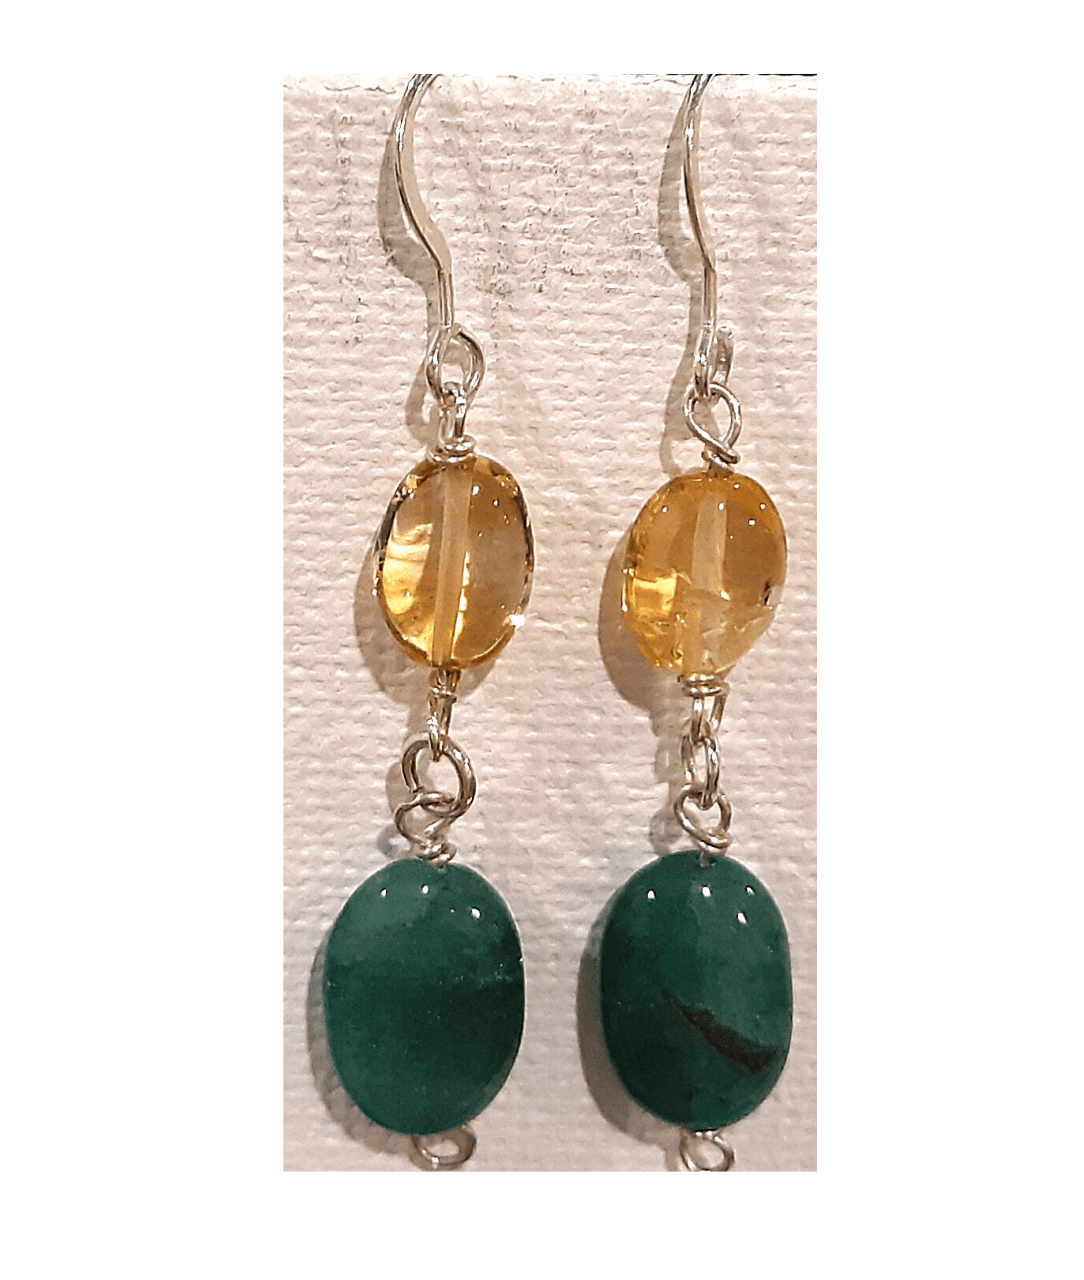 Yellow Citrine and Green Moss Agate Sterling Silver Dangle Earrings approx. 2 1/16"